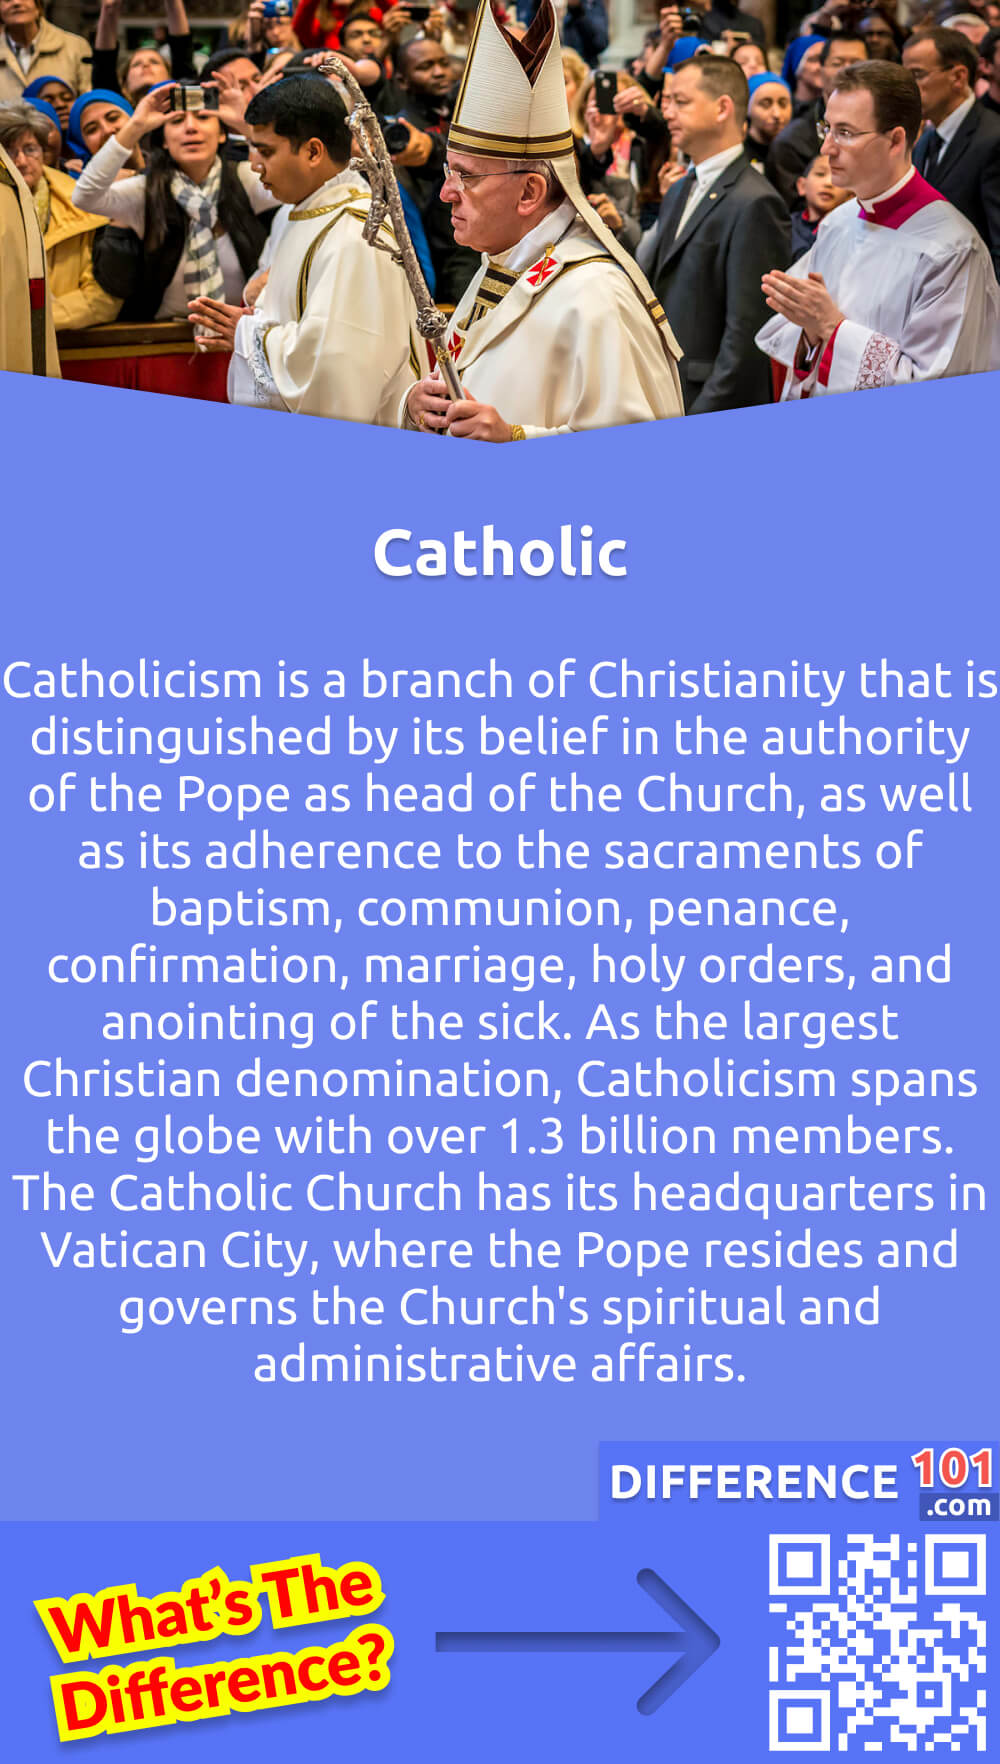 What Is Catholic? Catholicism is a branch of Christianity that is distinguished by its belief in the authority of the Pope as head of the Church, as well as its adherence to the sacraments of baptism, communion, penance, confirmation, marriage, holy orders, and anointing of the sick. As the largest Christian denomination, Catholicism spans the globe with over 1.3 billion members. The Catholic Church has its headquarters in Vatican City, where the Pope resides and governs the Church's spiritual and administrative affairs. Its teachings are based on the Bible, sacred tradition, and the Magisterium, which is the teaching authority of the Church. Catholics believe in the salvation of Christ and the importance of leading a virtuous life through faith, hope, love, and good works.